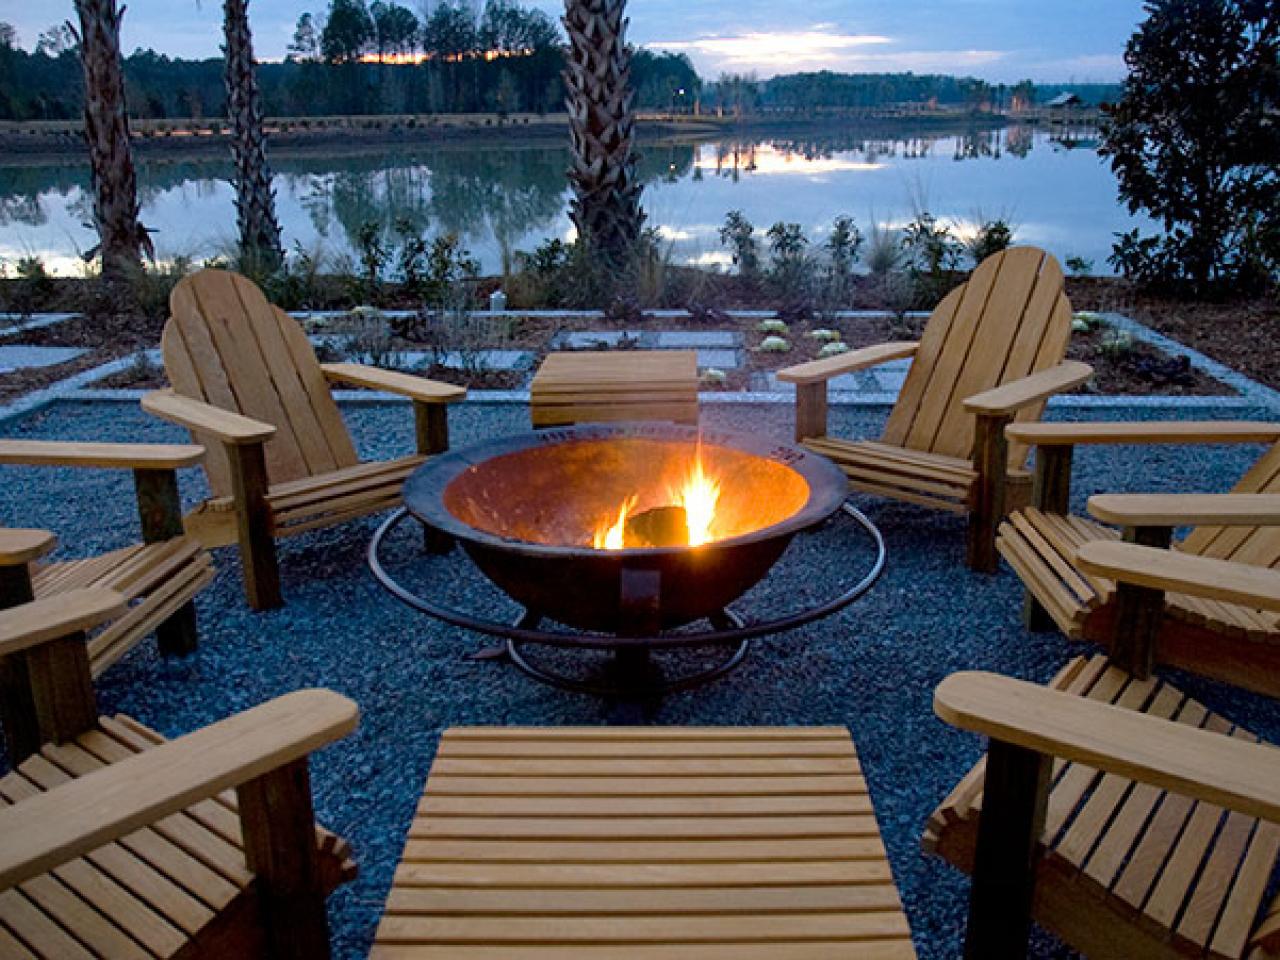 66 Fire Pit And Outdoor Fireplace Ideas, Outdoor Deck Fire Pit